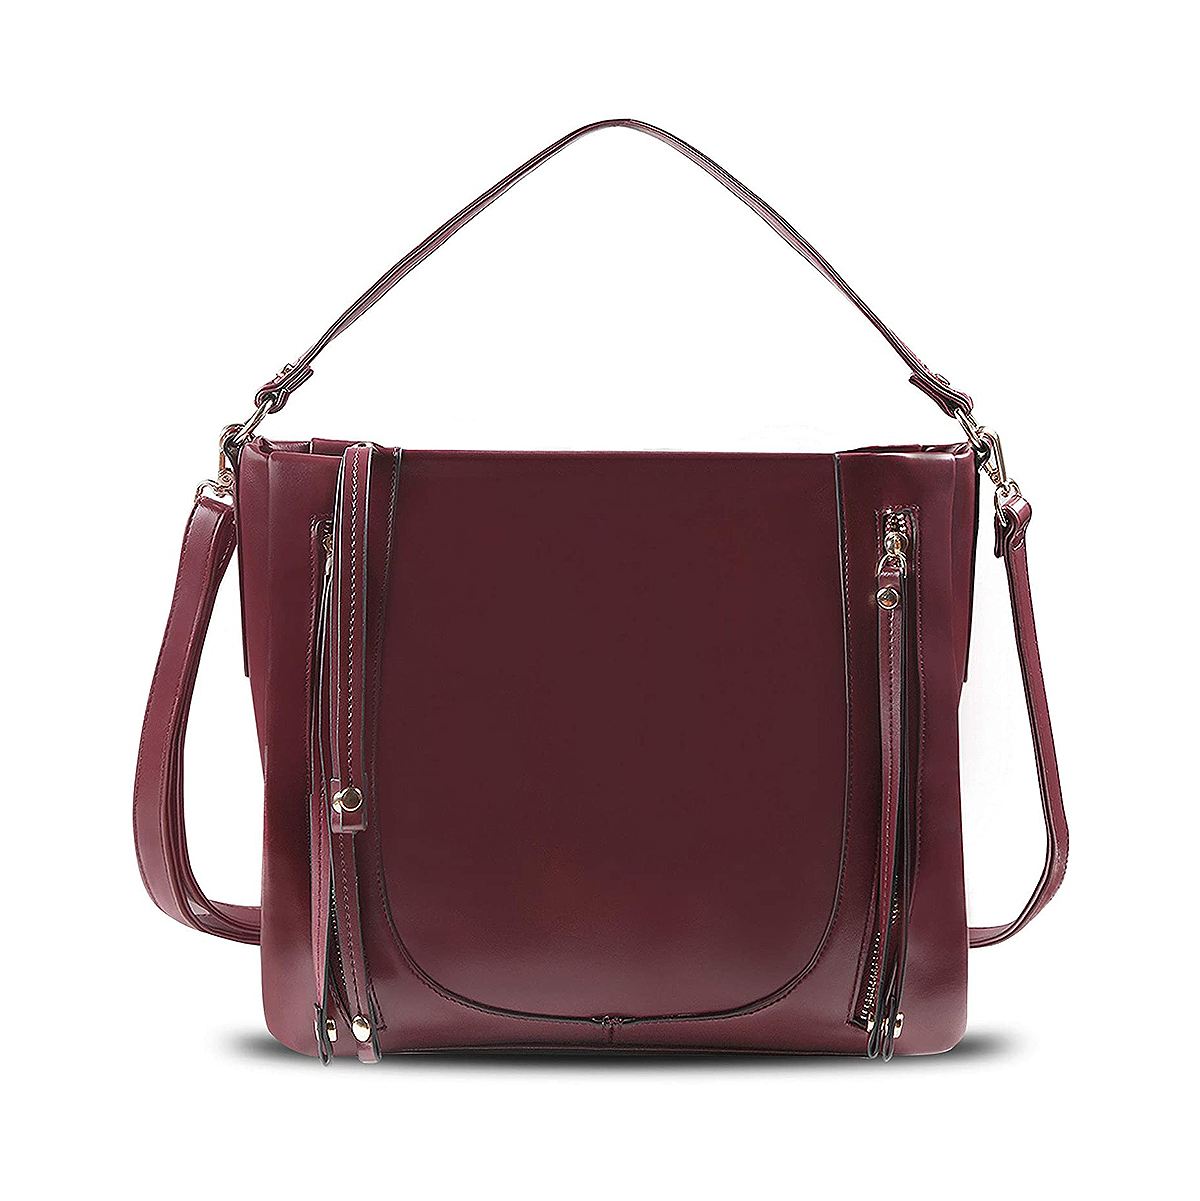 Crossbody Bags Under $40 at Amazon: Our 21 Top Picks | Us Weekly